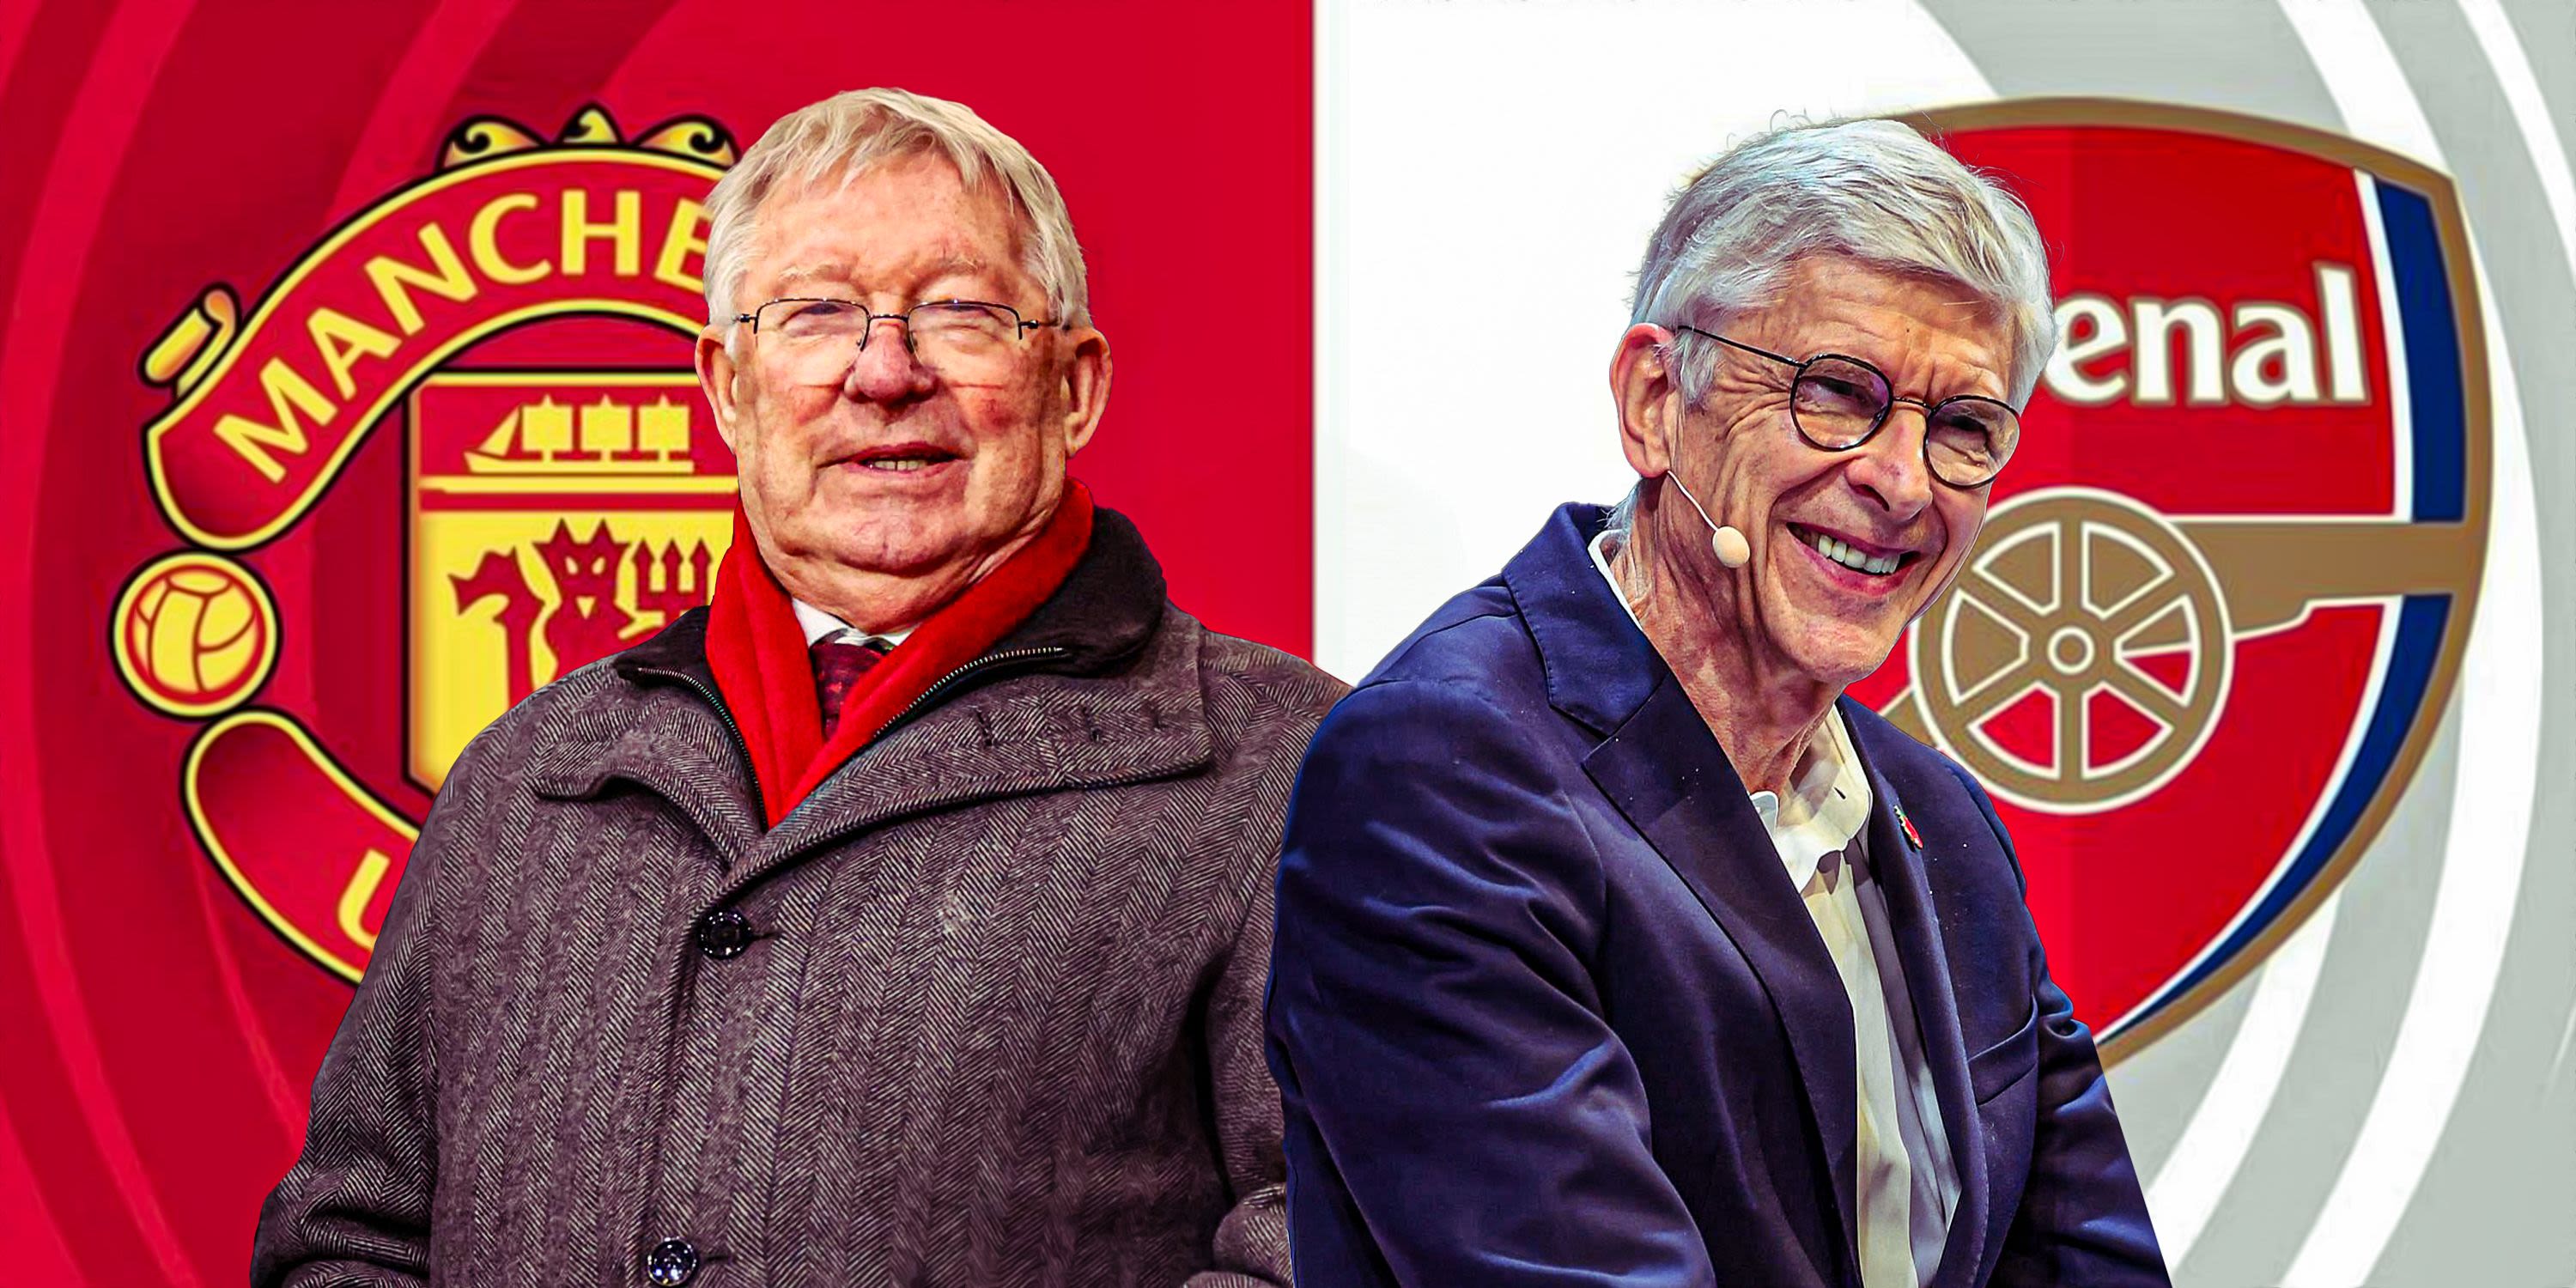 'I played for Sir Alex Ferguson and Arsene Wenger - there was one key difference'